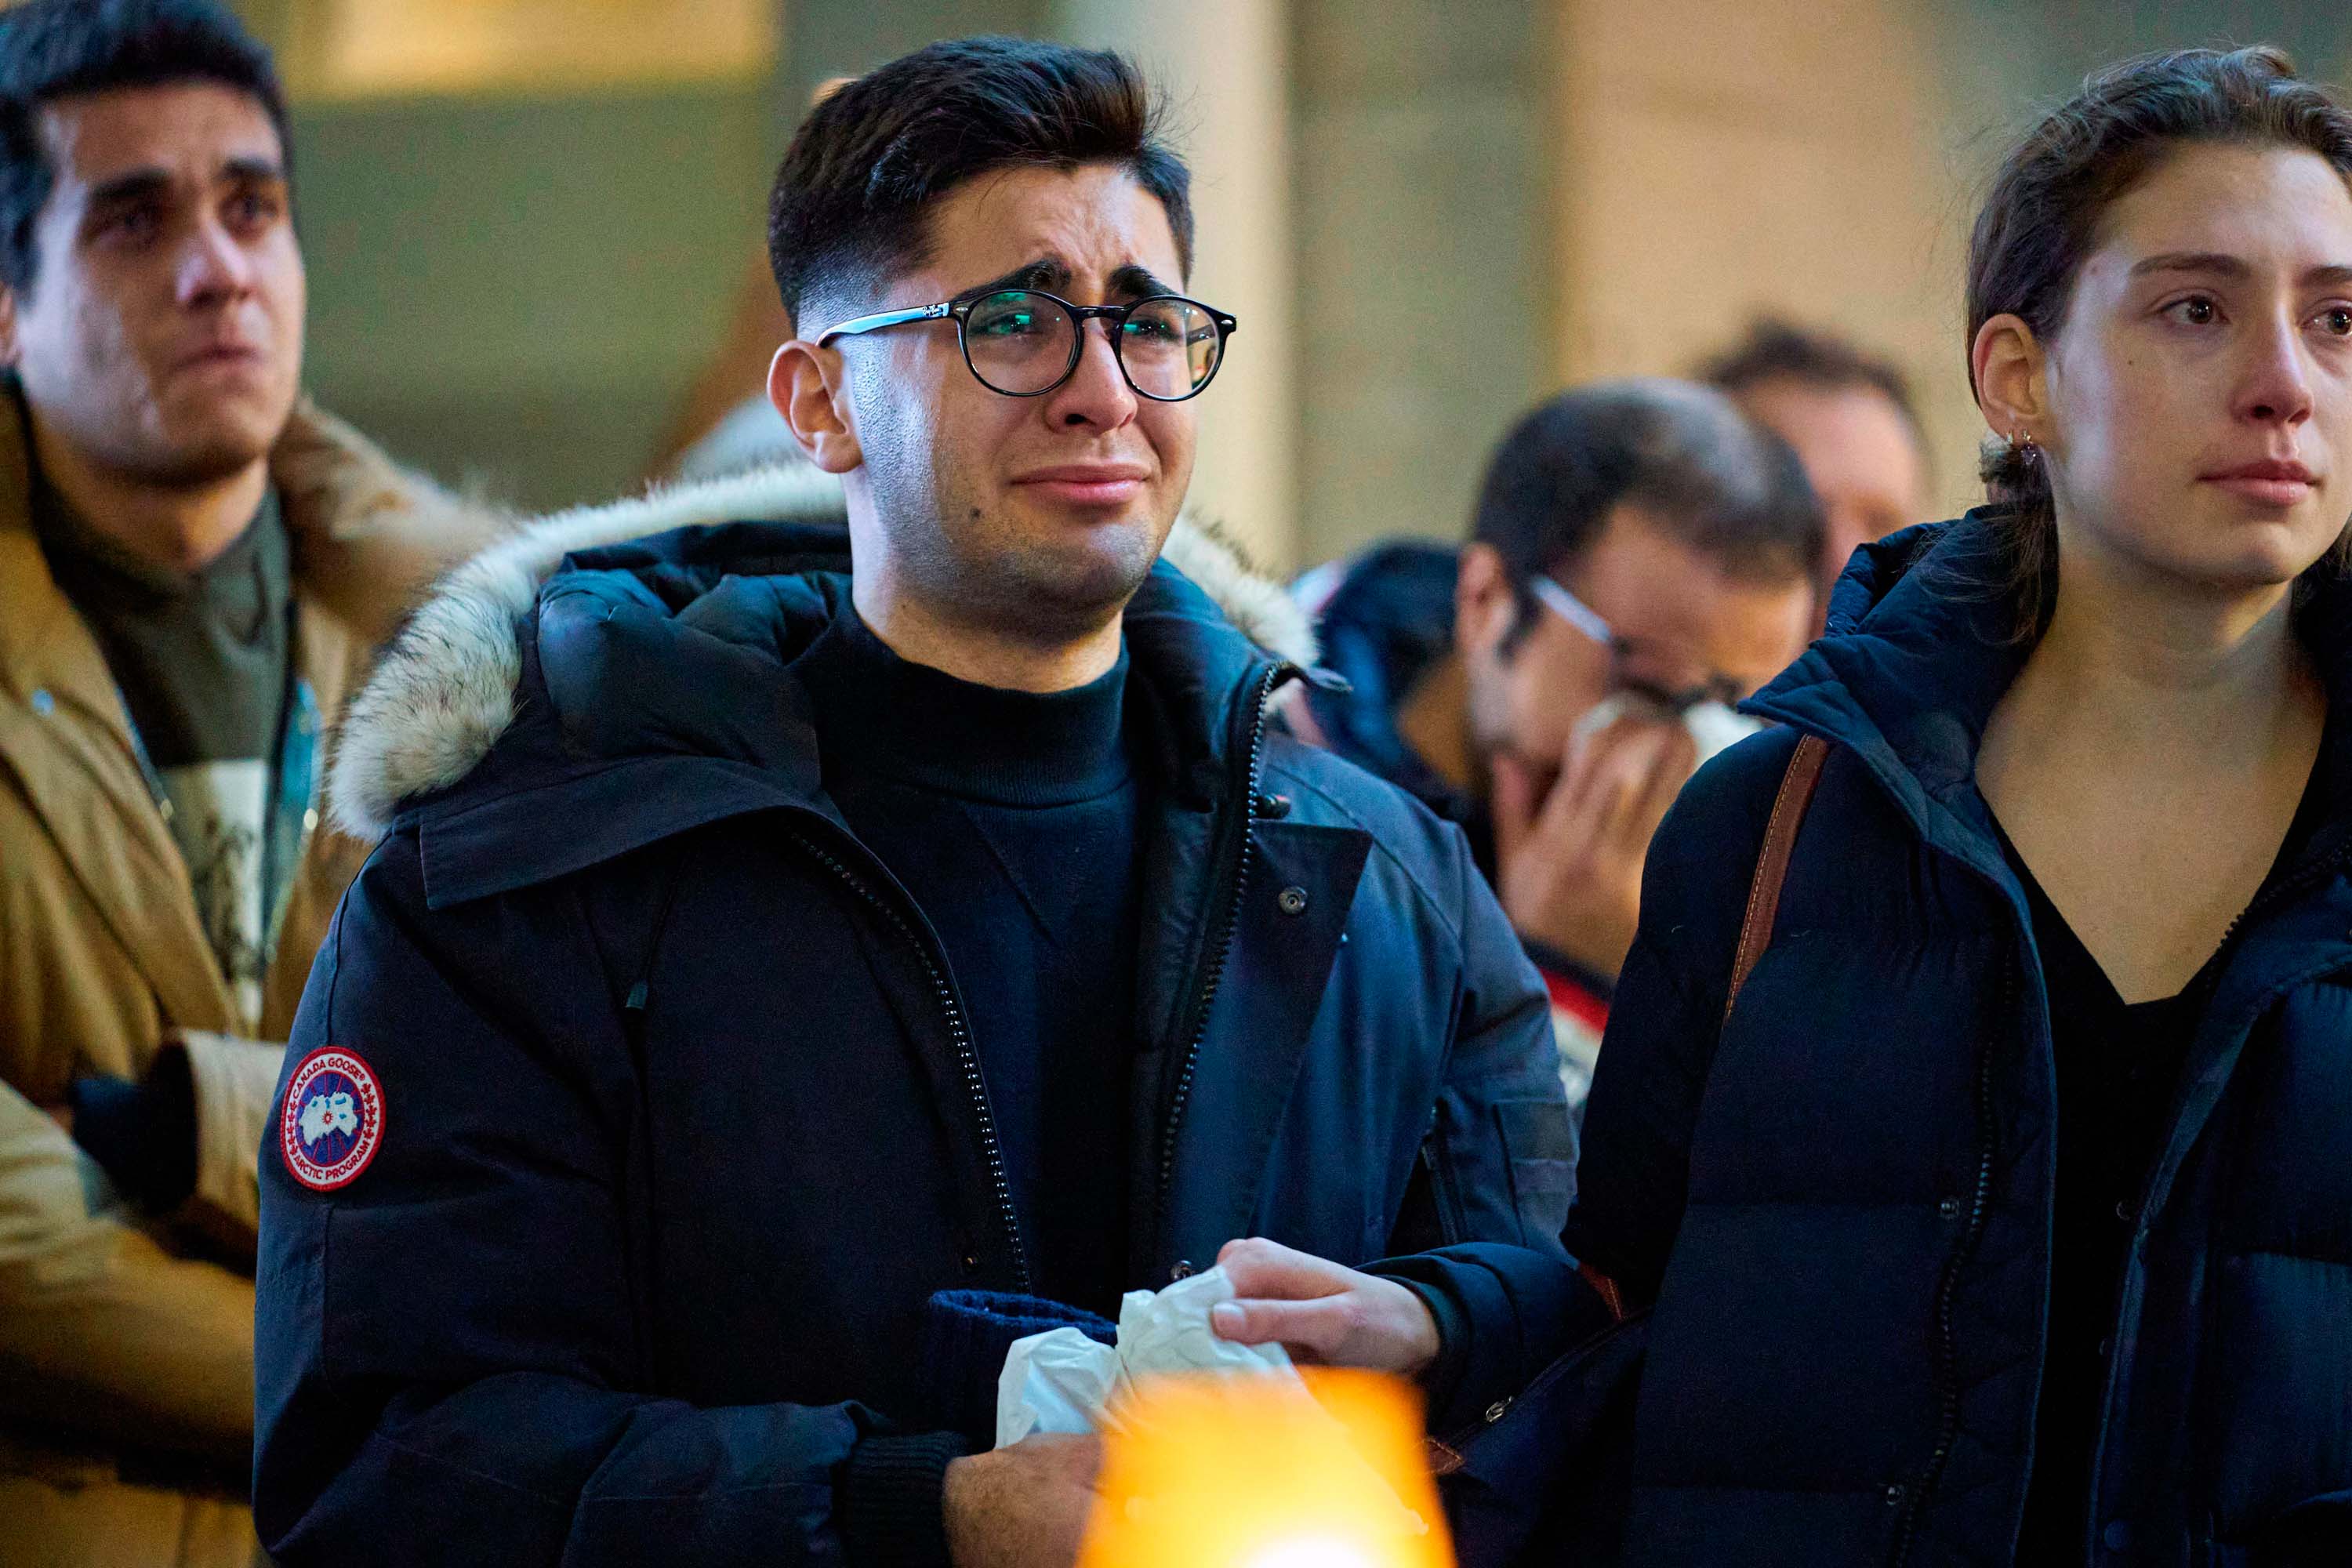 People react during a service at Western University in London, Ontario on January 8 for the four graduate students who were killed in the crash in Iran.